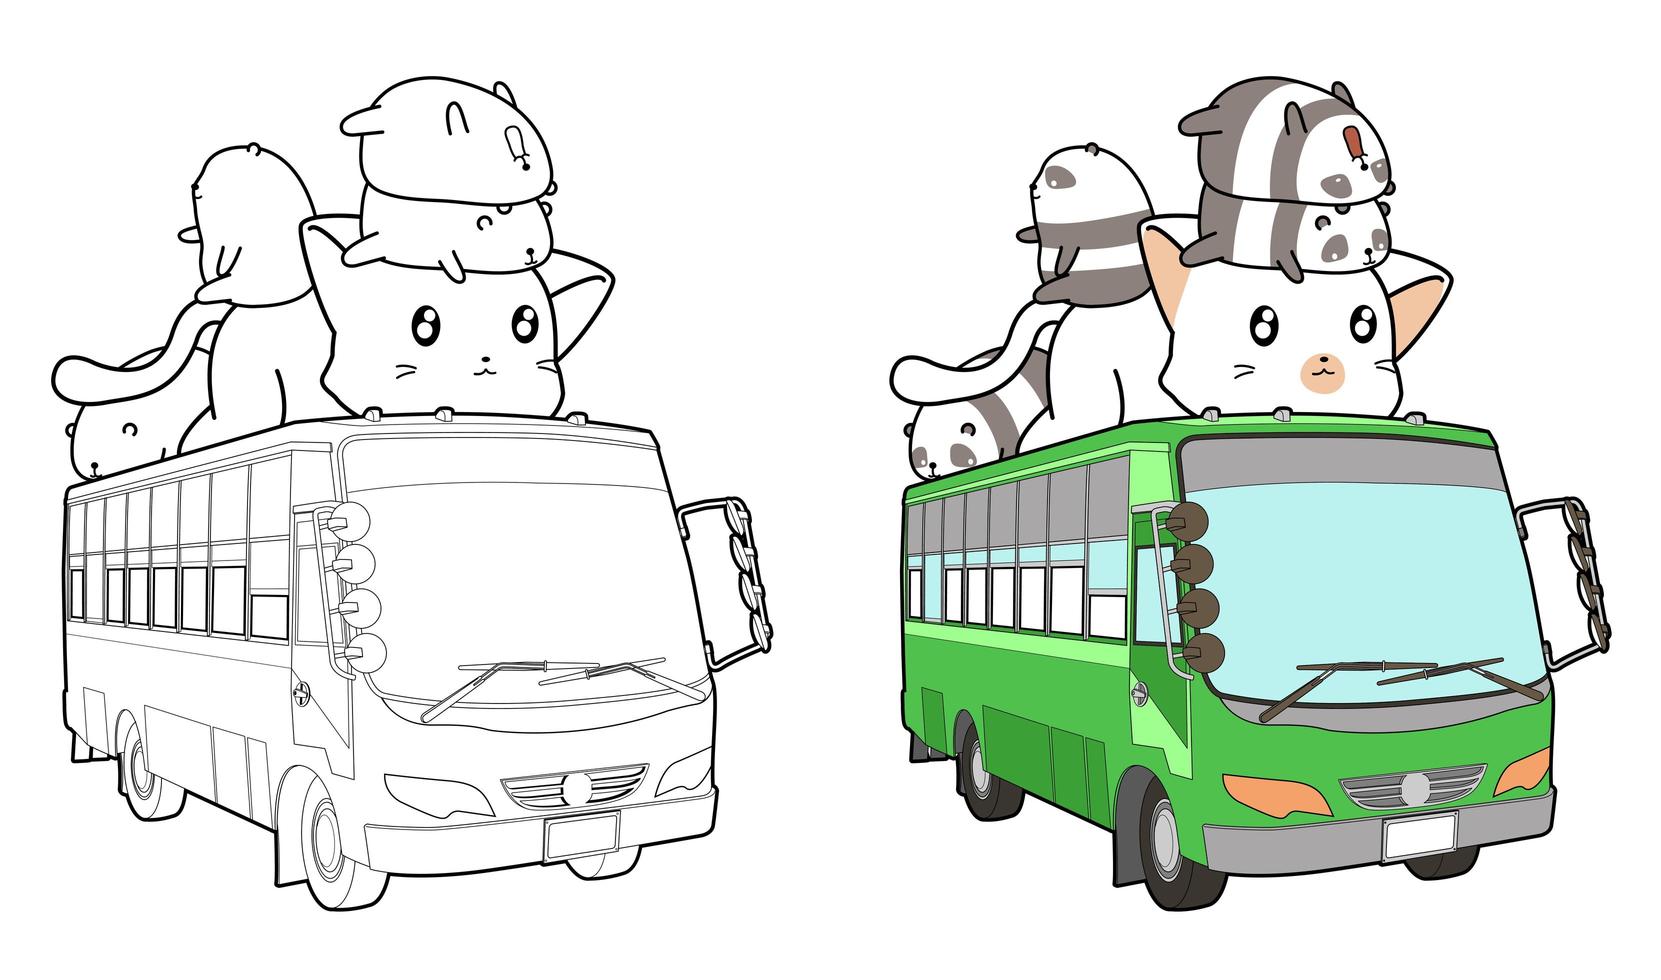 Big cat and panda on bus cartoon coloring page vector